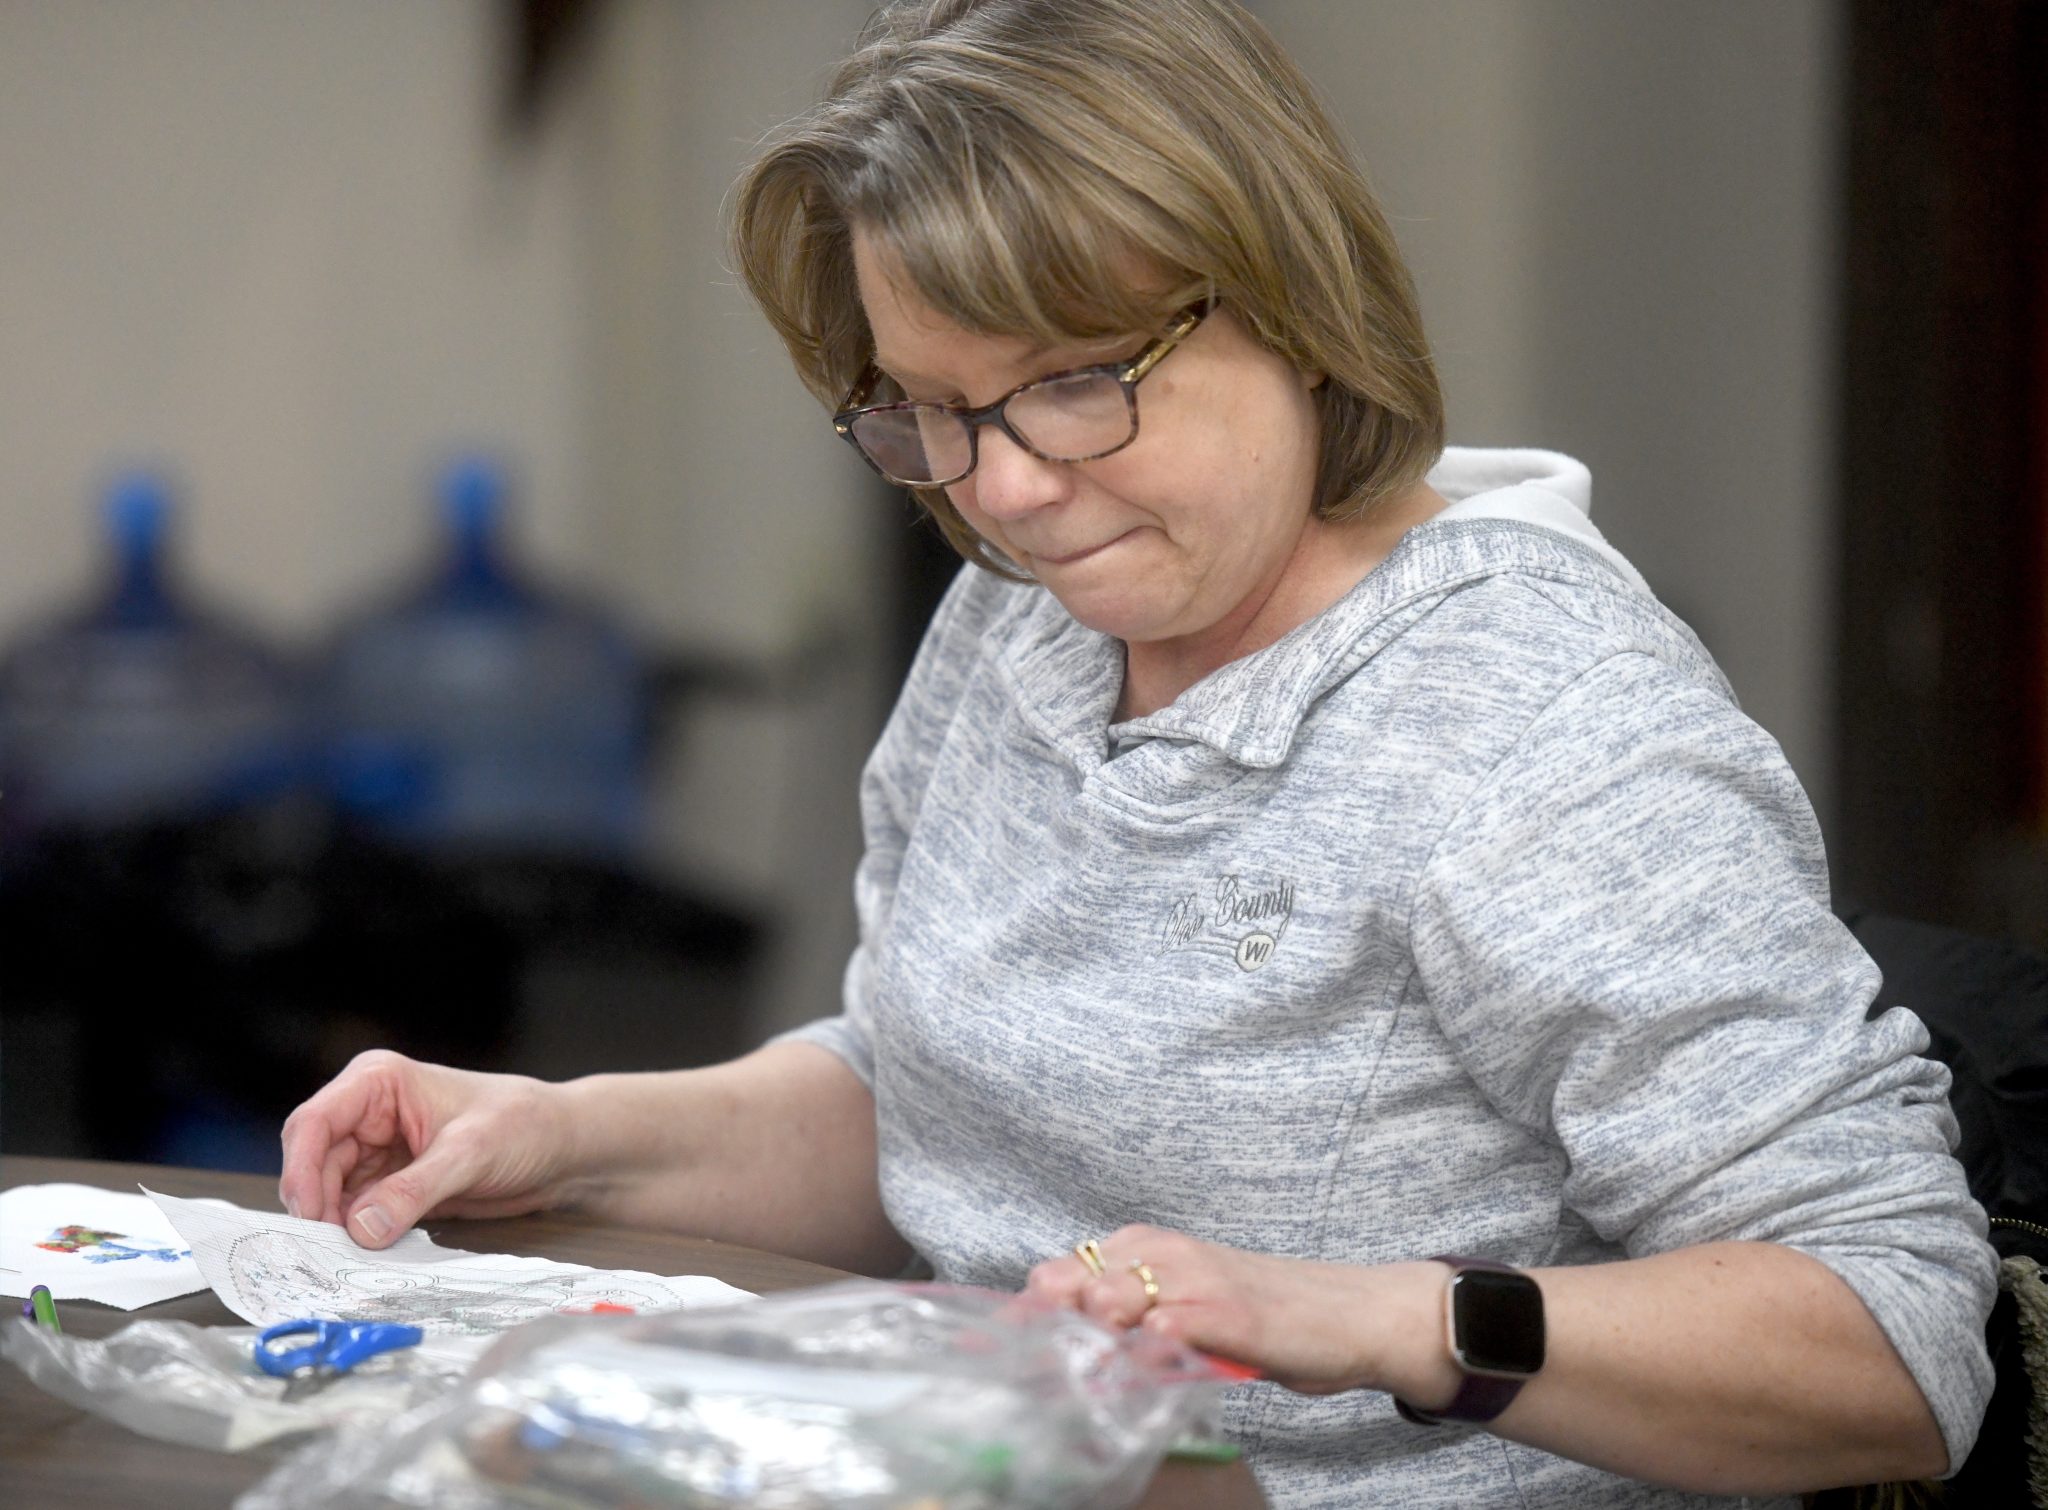 Craft nights build community at St. Francis Xavier in Sartell The